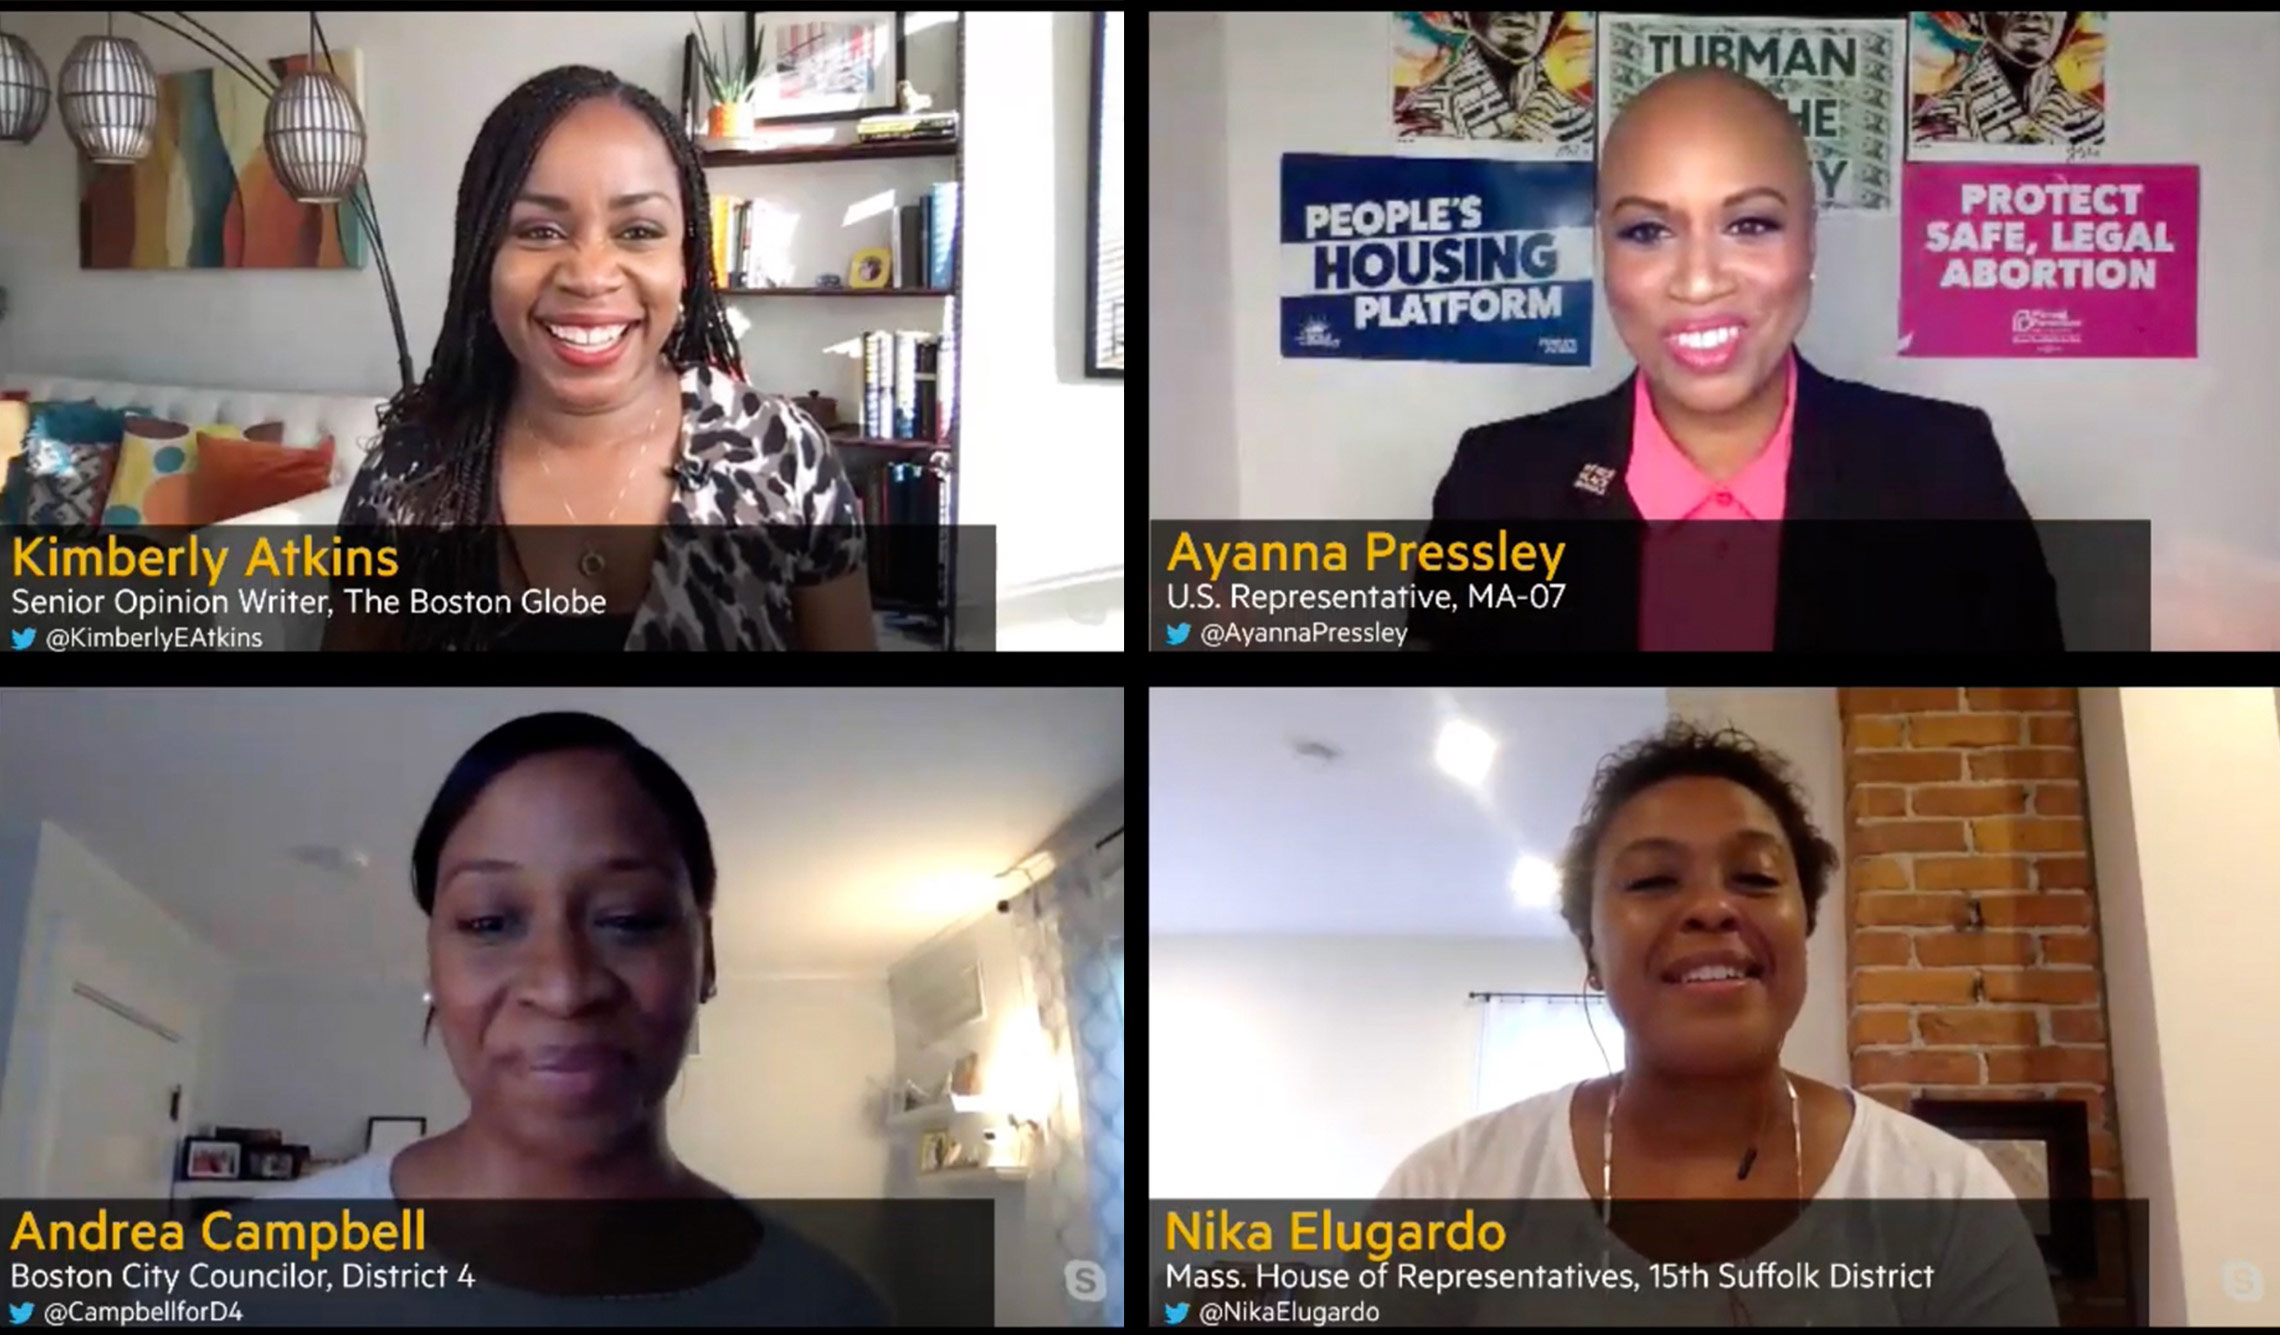 Screenshot from Black Boston event entitled “Changing the Face of Politics” hosted by Boston University Initiative on Cities, the Boston University Office of Diversity & Inclusion, and WBUR CitySpace. In the screenshot, top left, is “Kimberly Atkins - Senior Opinion Writer, The Boston Globe, @kimberlyEAtkins,” smiling with a bookshelf and couch behind her. Top right is Ayanna Pressley in a pink button down and black blazer with signs that say “people’s housing platform” and “protect safe, legal abortion” behind her. Her label reads “Ayanna Pressley - U.S. Representatives, MA-07, @AyannaPressley” On the bottom left, “Andrea Campbell - Boston City Councilor, District 4, @CampbellforD4", Campbell smiles. And bottom right is Nika Elugardo, Massachusetts House of Representatives, 15th Suffolk District, @NikaElugardo” who smiles and with part of a brick wall seen behind her.